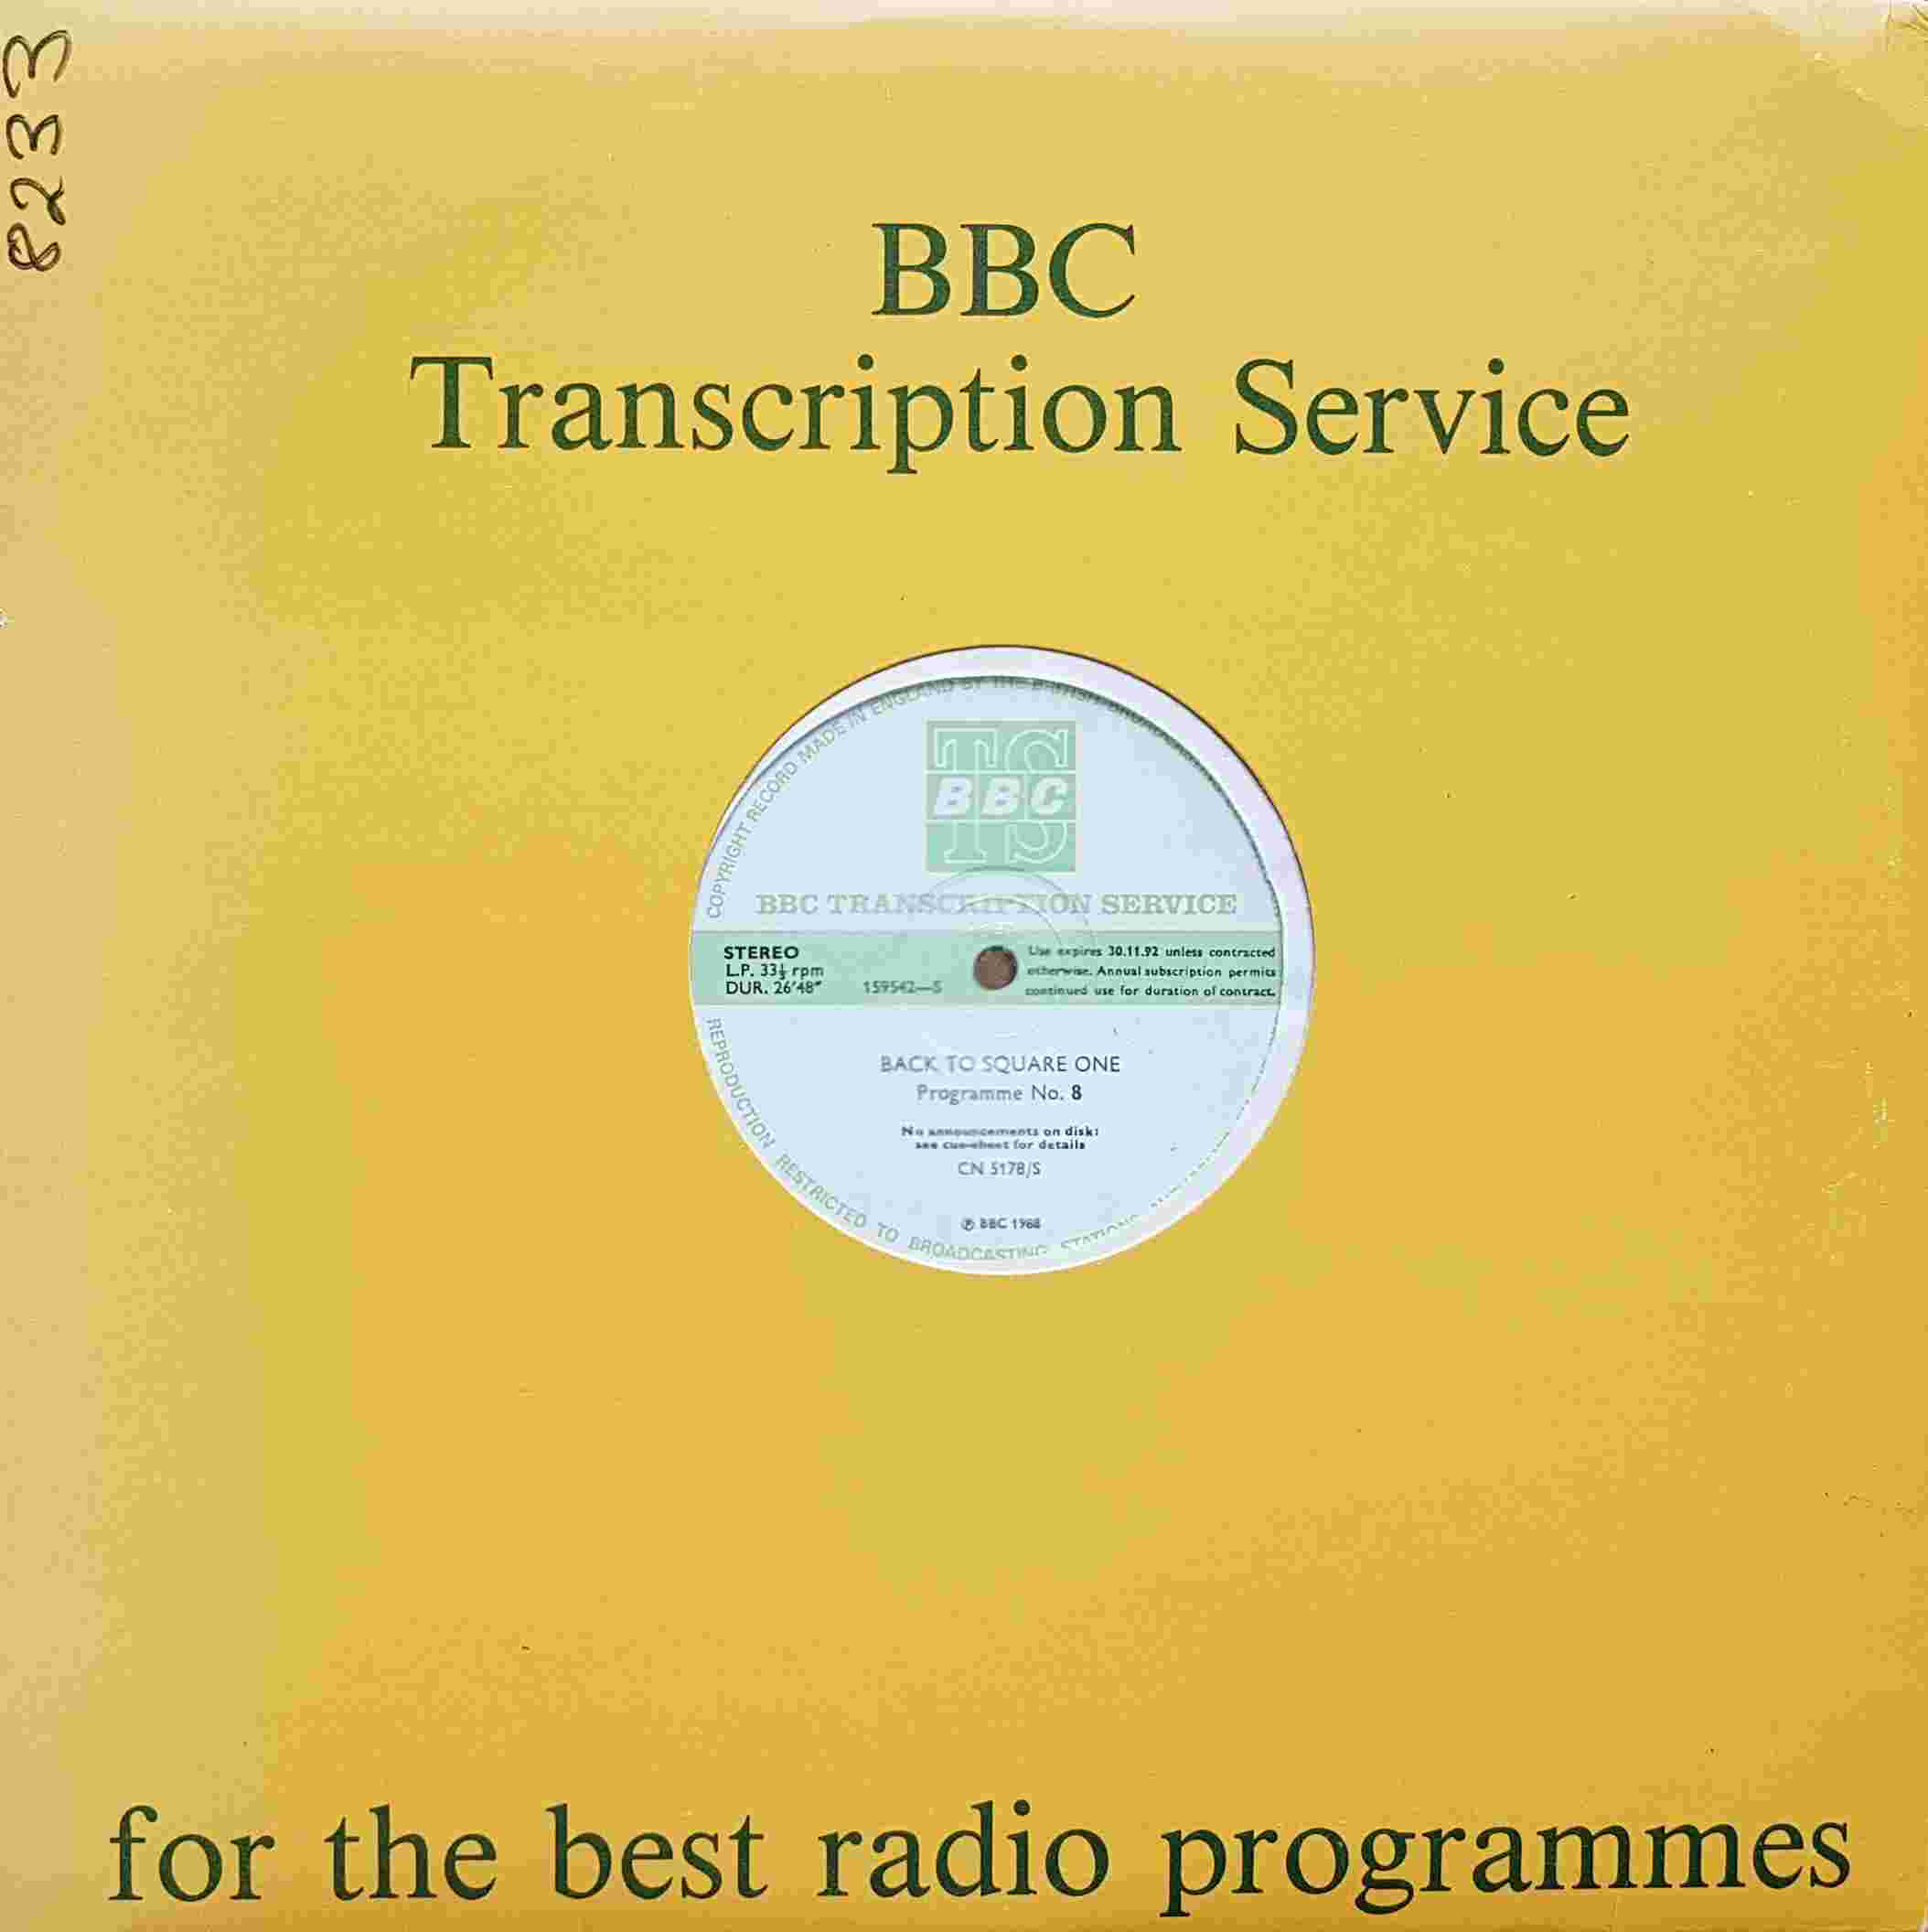 Picture of CN 5178 S 4 Back to square one - Programme 7 & 8 by artist Chris Serle from the BBC records and Tapes library